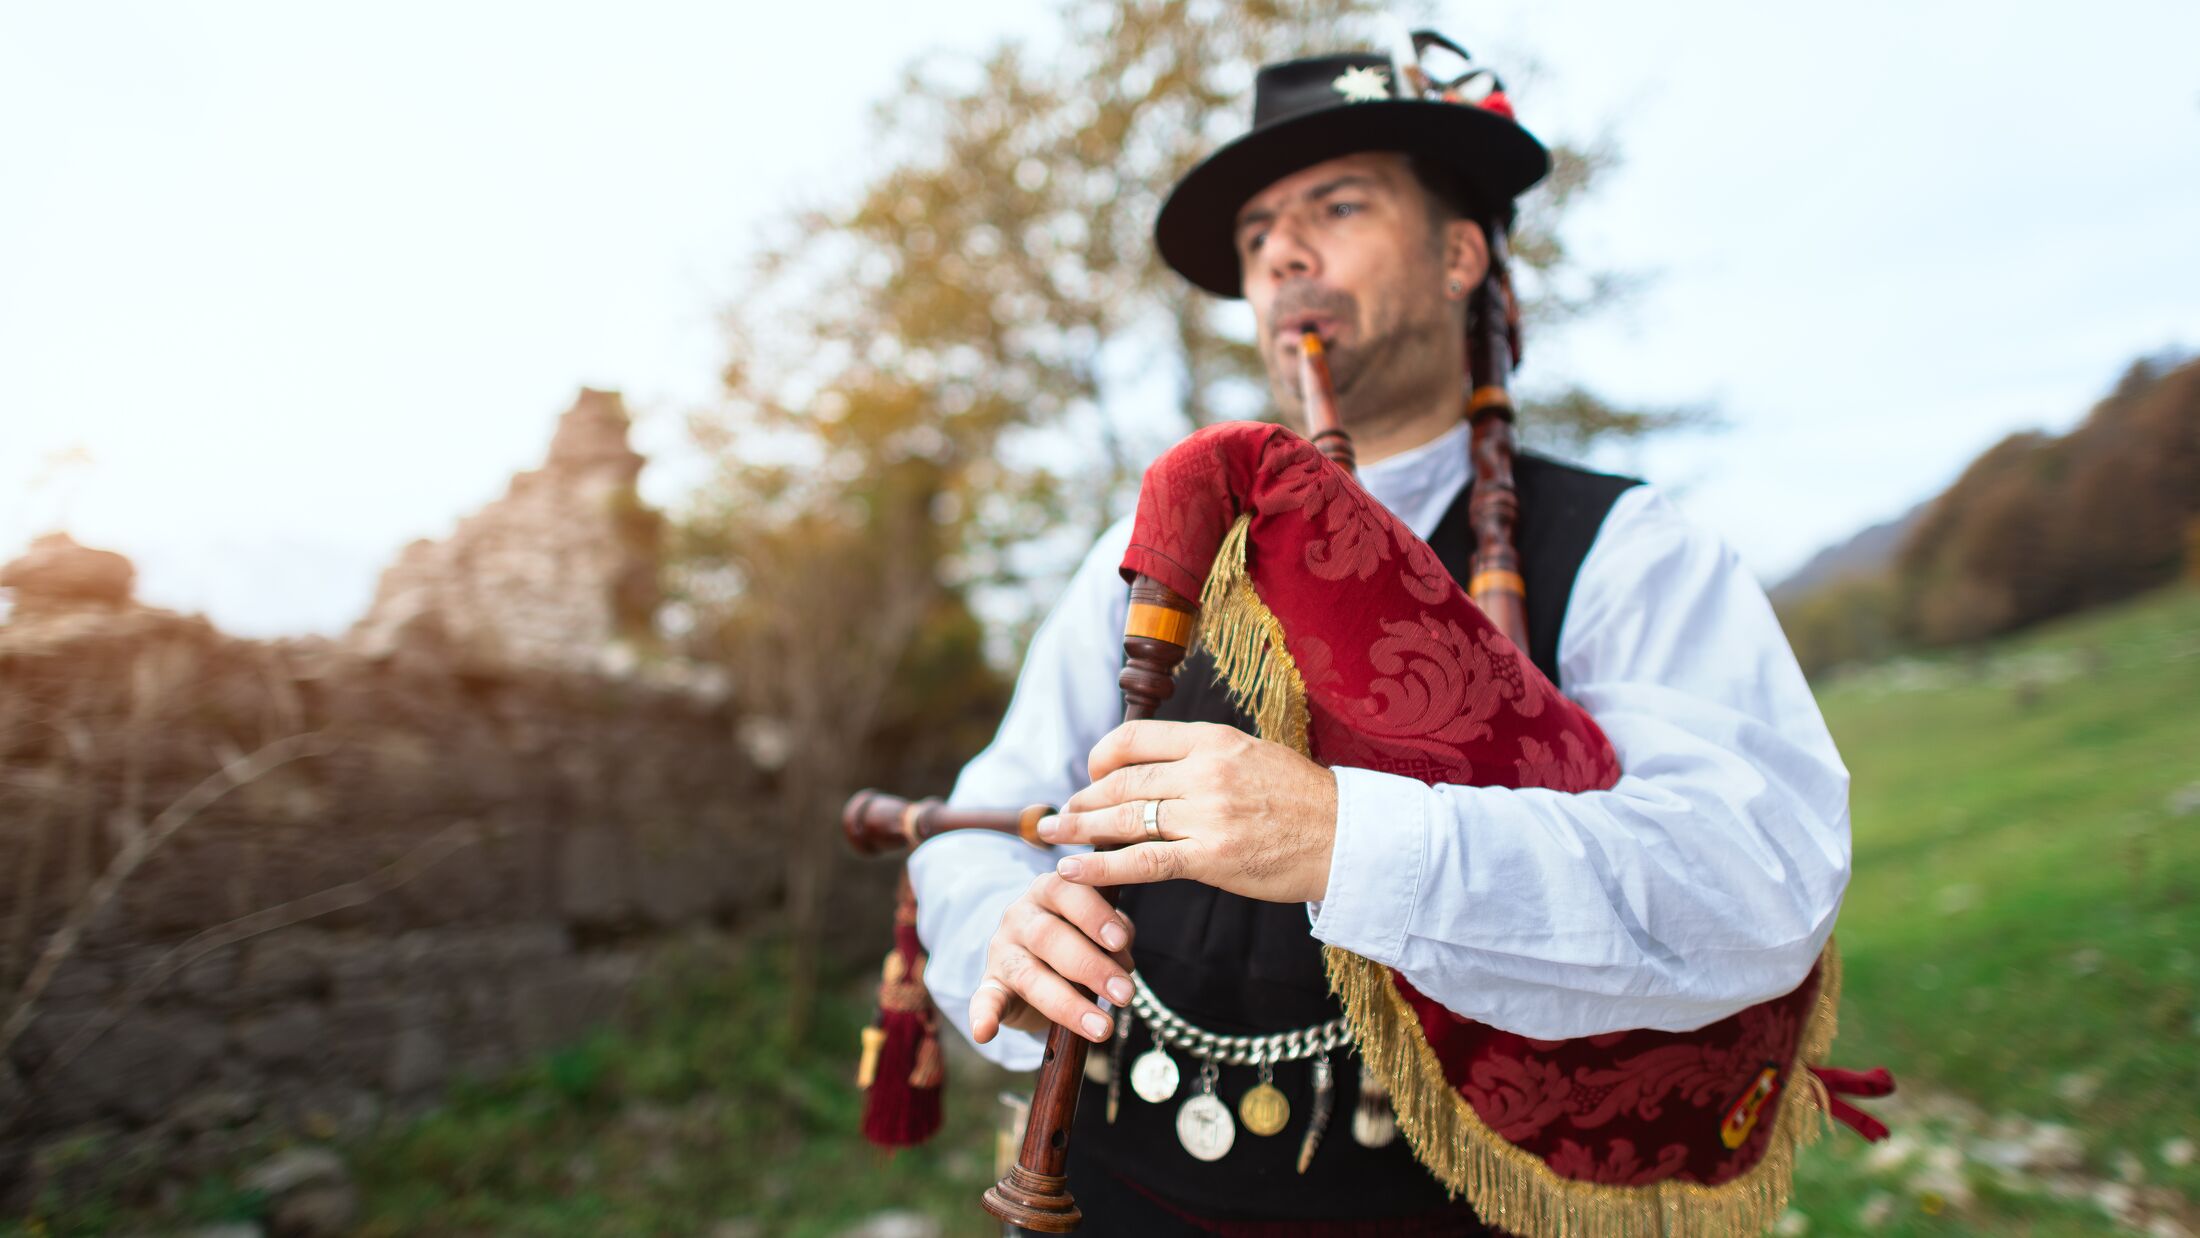 Typical player in traditional bergamo bagpipe from the alpine valleys of northern Italy.